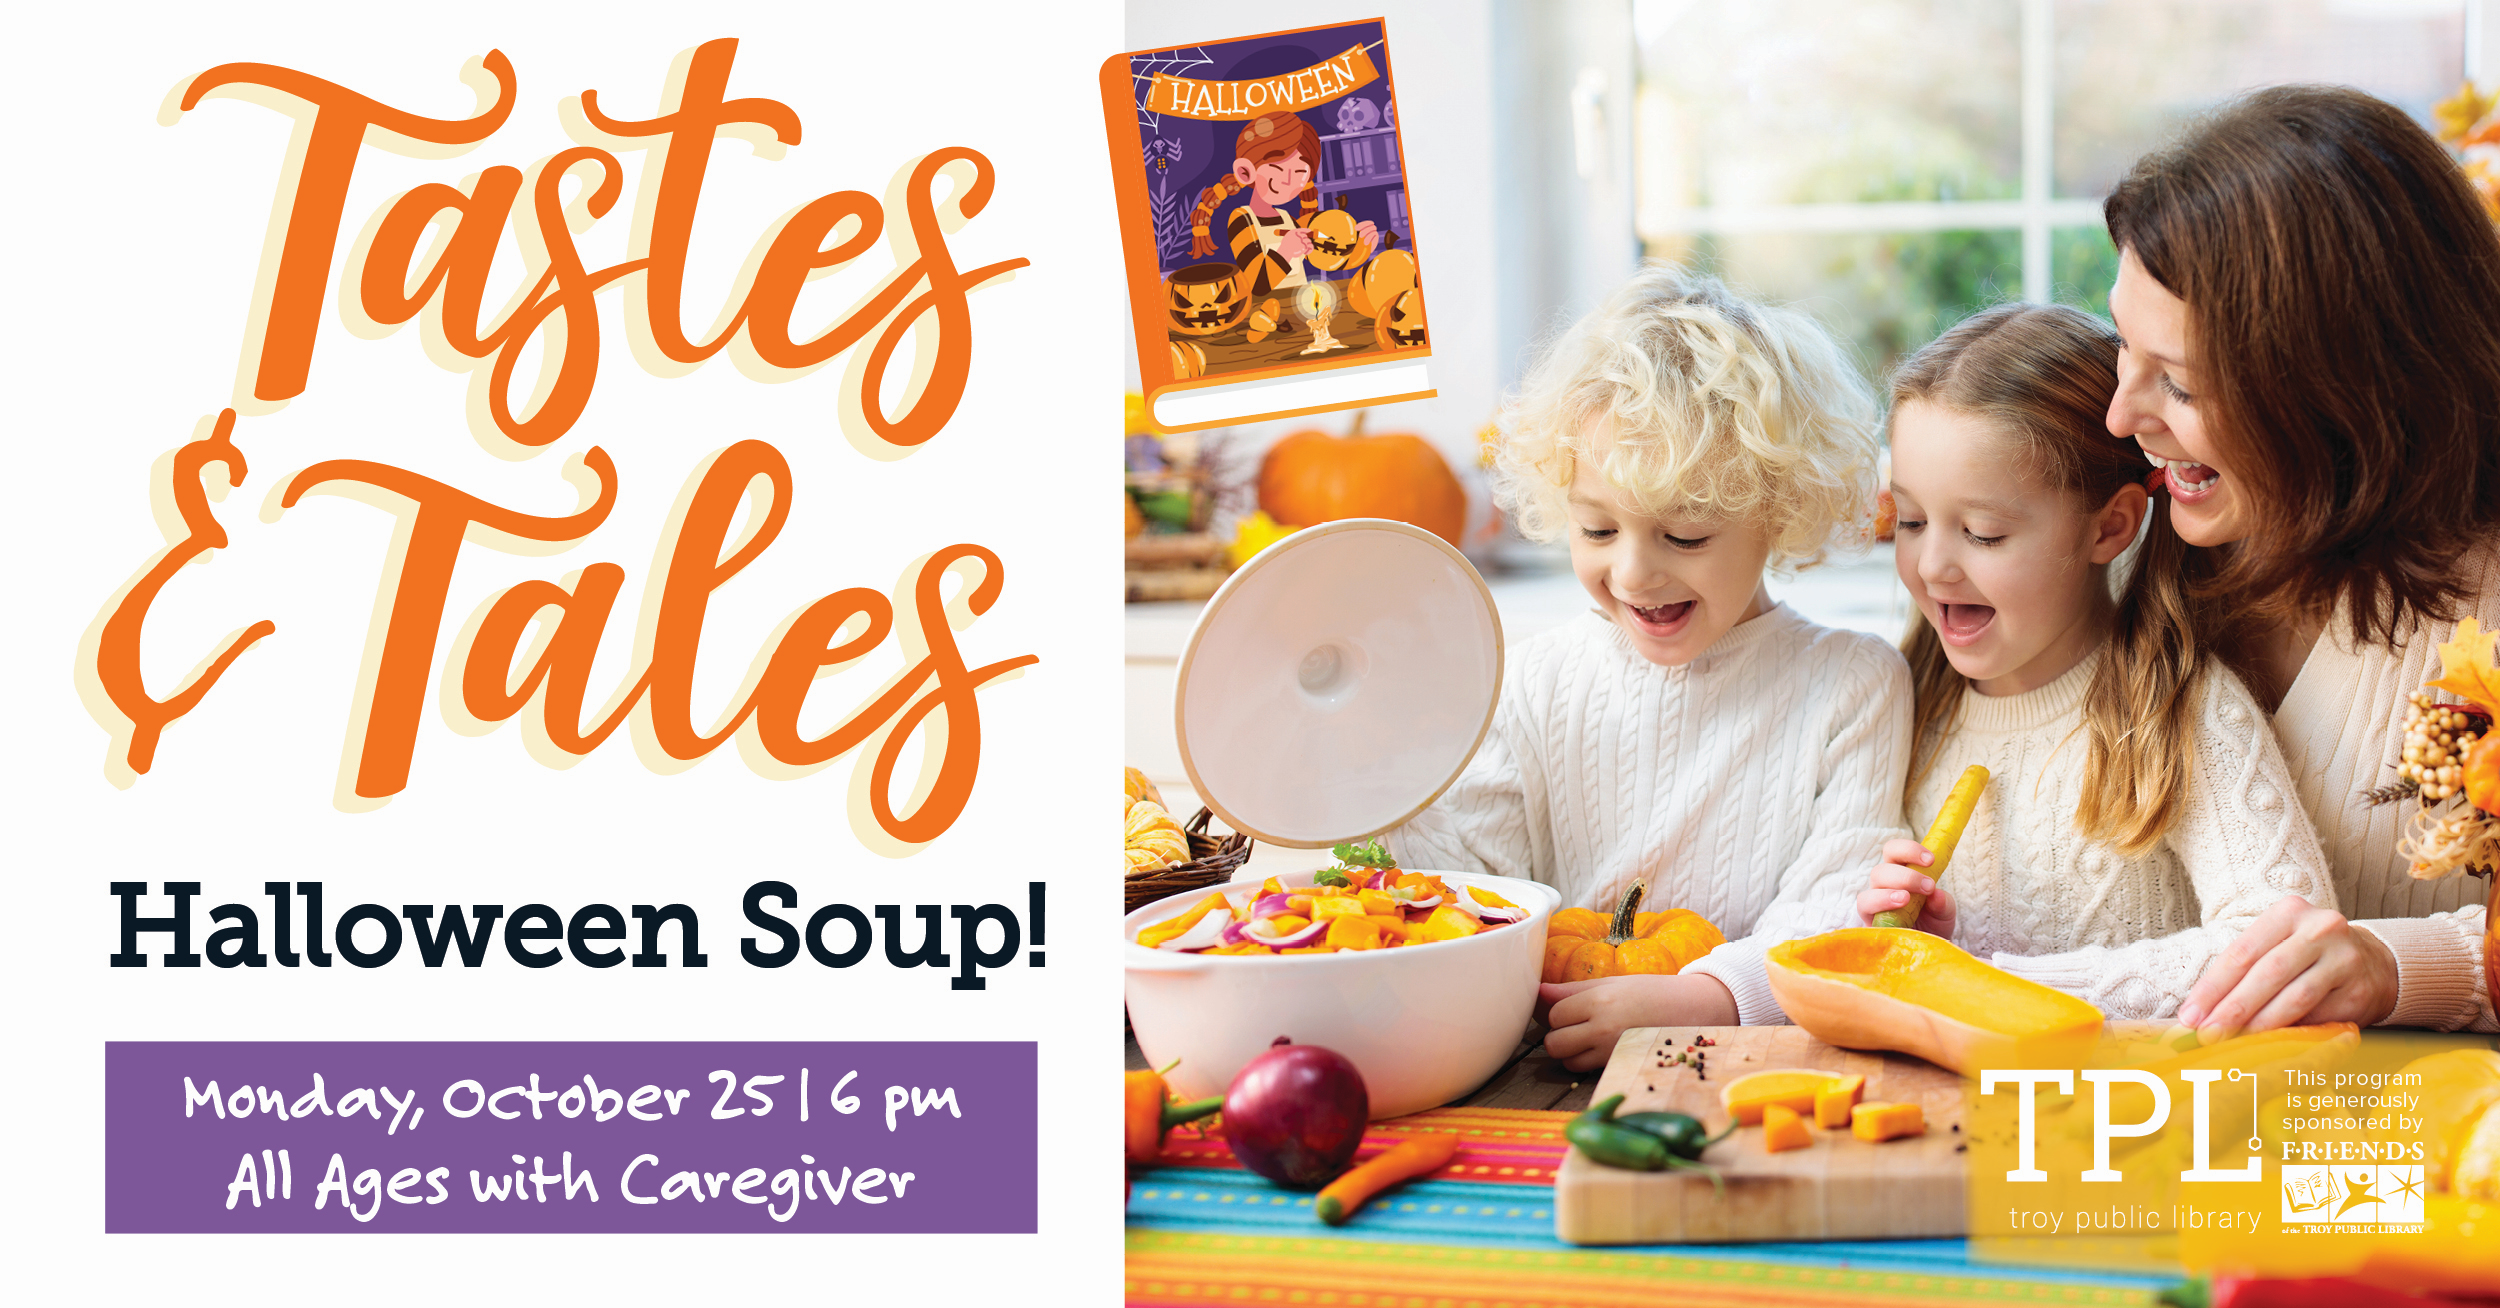 Tastes & Tales: Halloween Soup Monday, October 25 at 6pm. All Ages with Caregiver. Sponsored by the Friends of the Troy Public Library